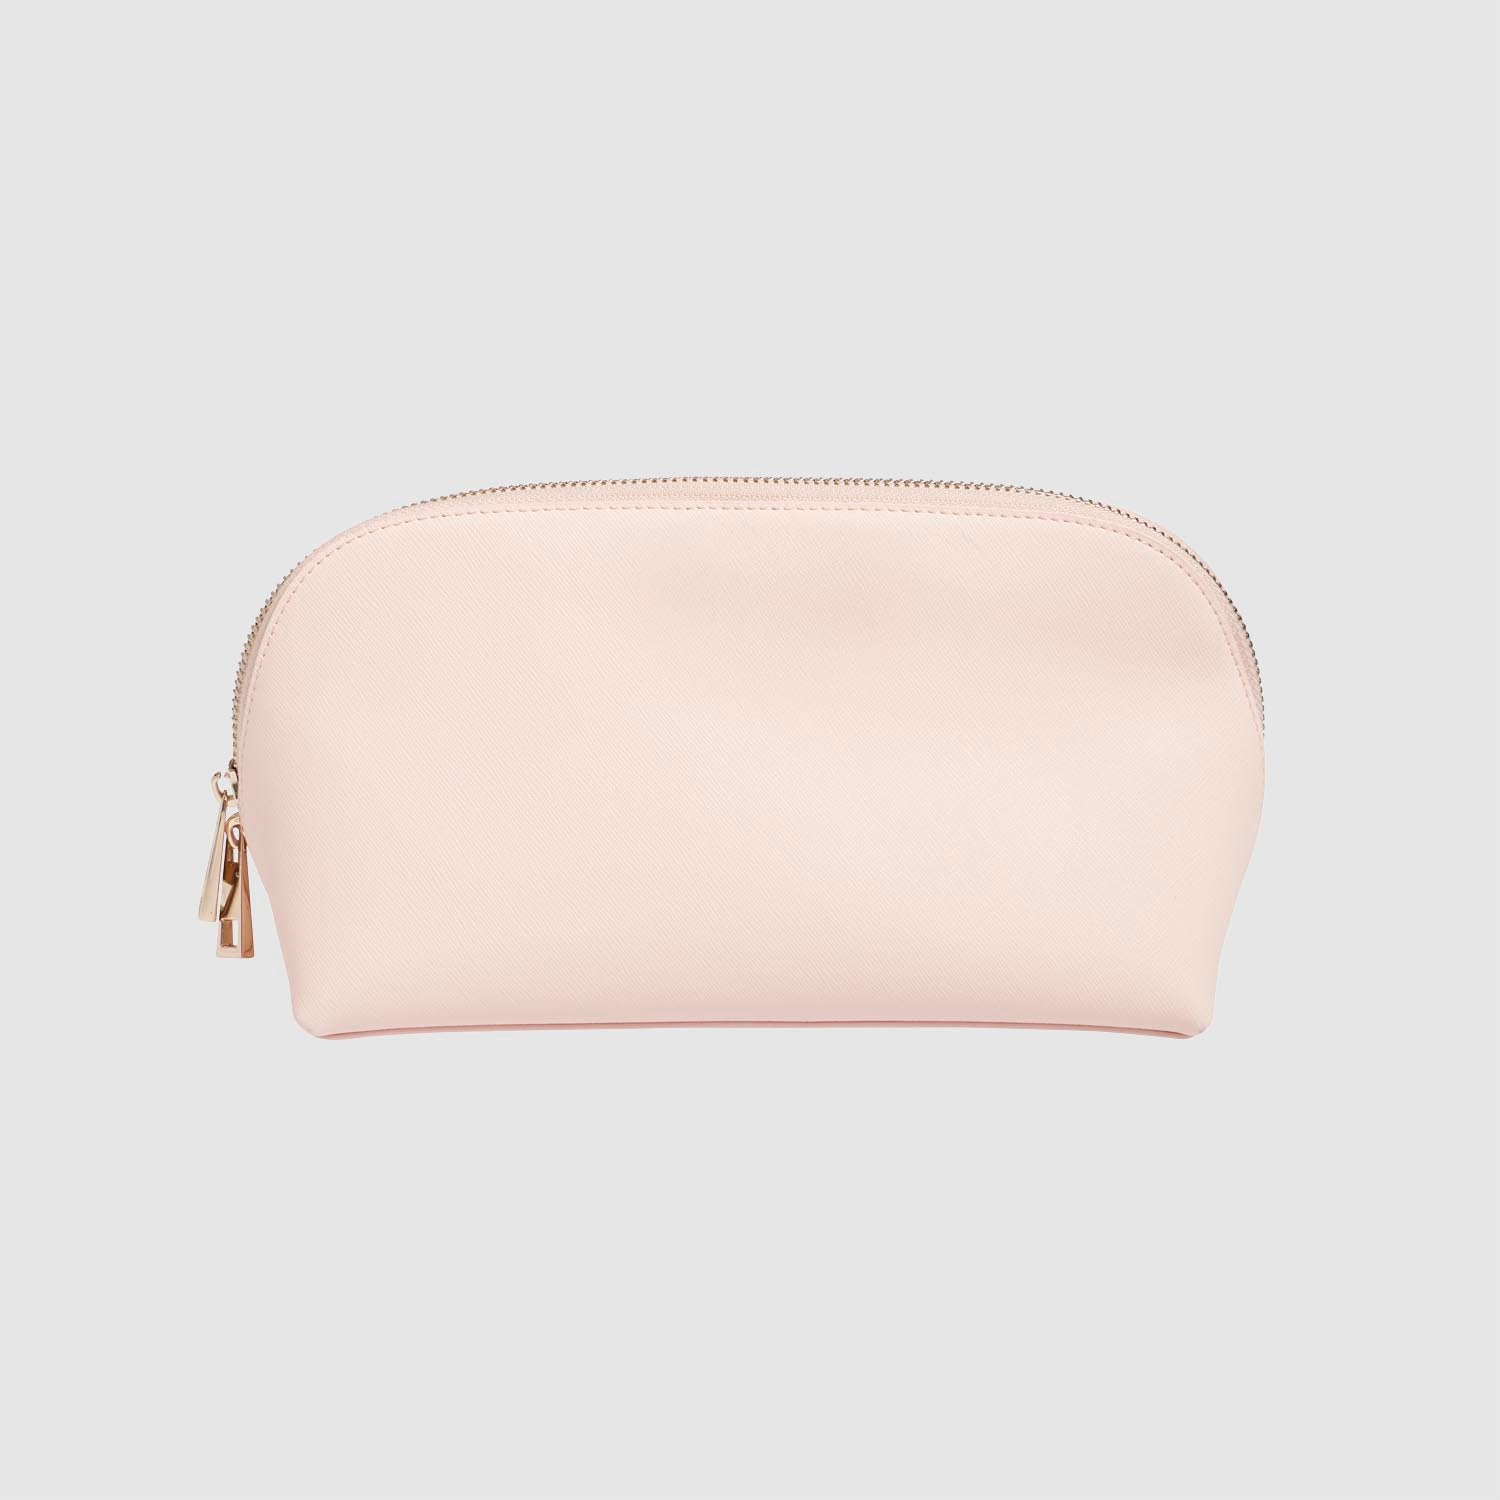 Large Pale Pink Saffiano Leather Cosmetic Case